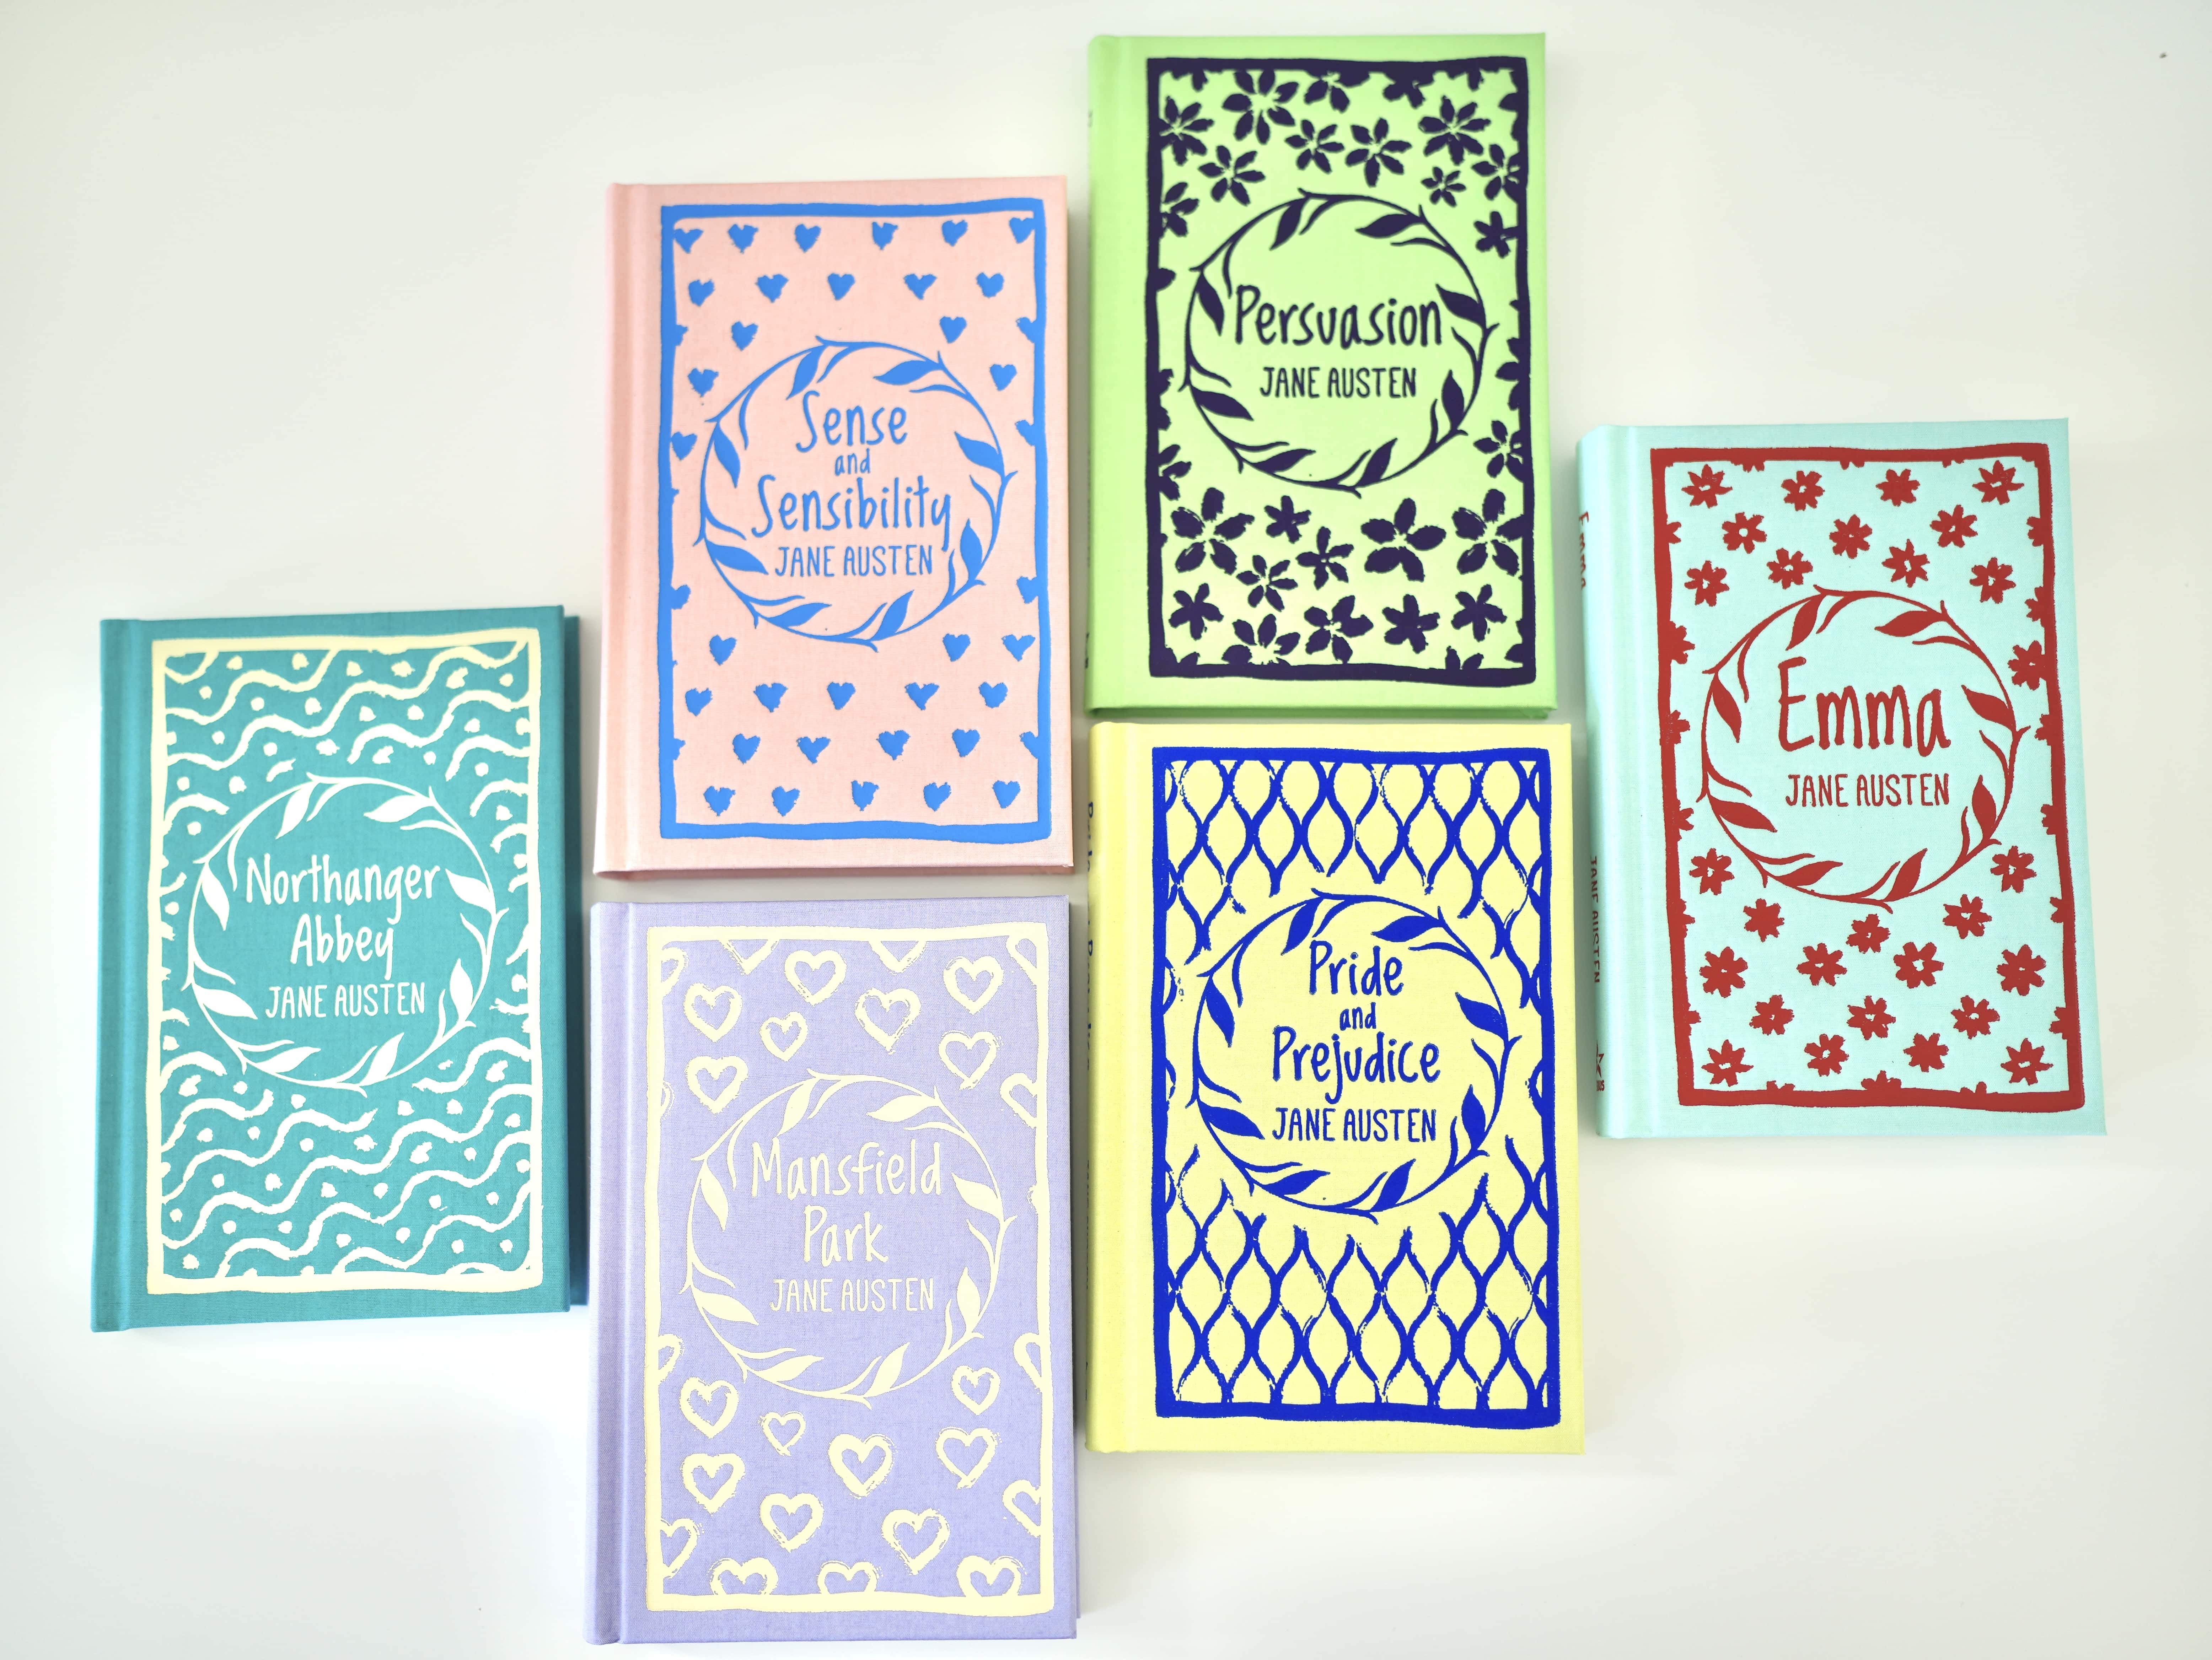 Photo of six Jane Austen novels laying on white background. Northanger Abbey with teal cover, Sense and Sensibility with Pink Cover, Mansfield Park with lavender cover, Persuasion with lime cover, Pride and Prejudice with yellow cover, Emma with light blue cover.